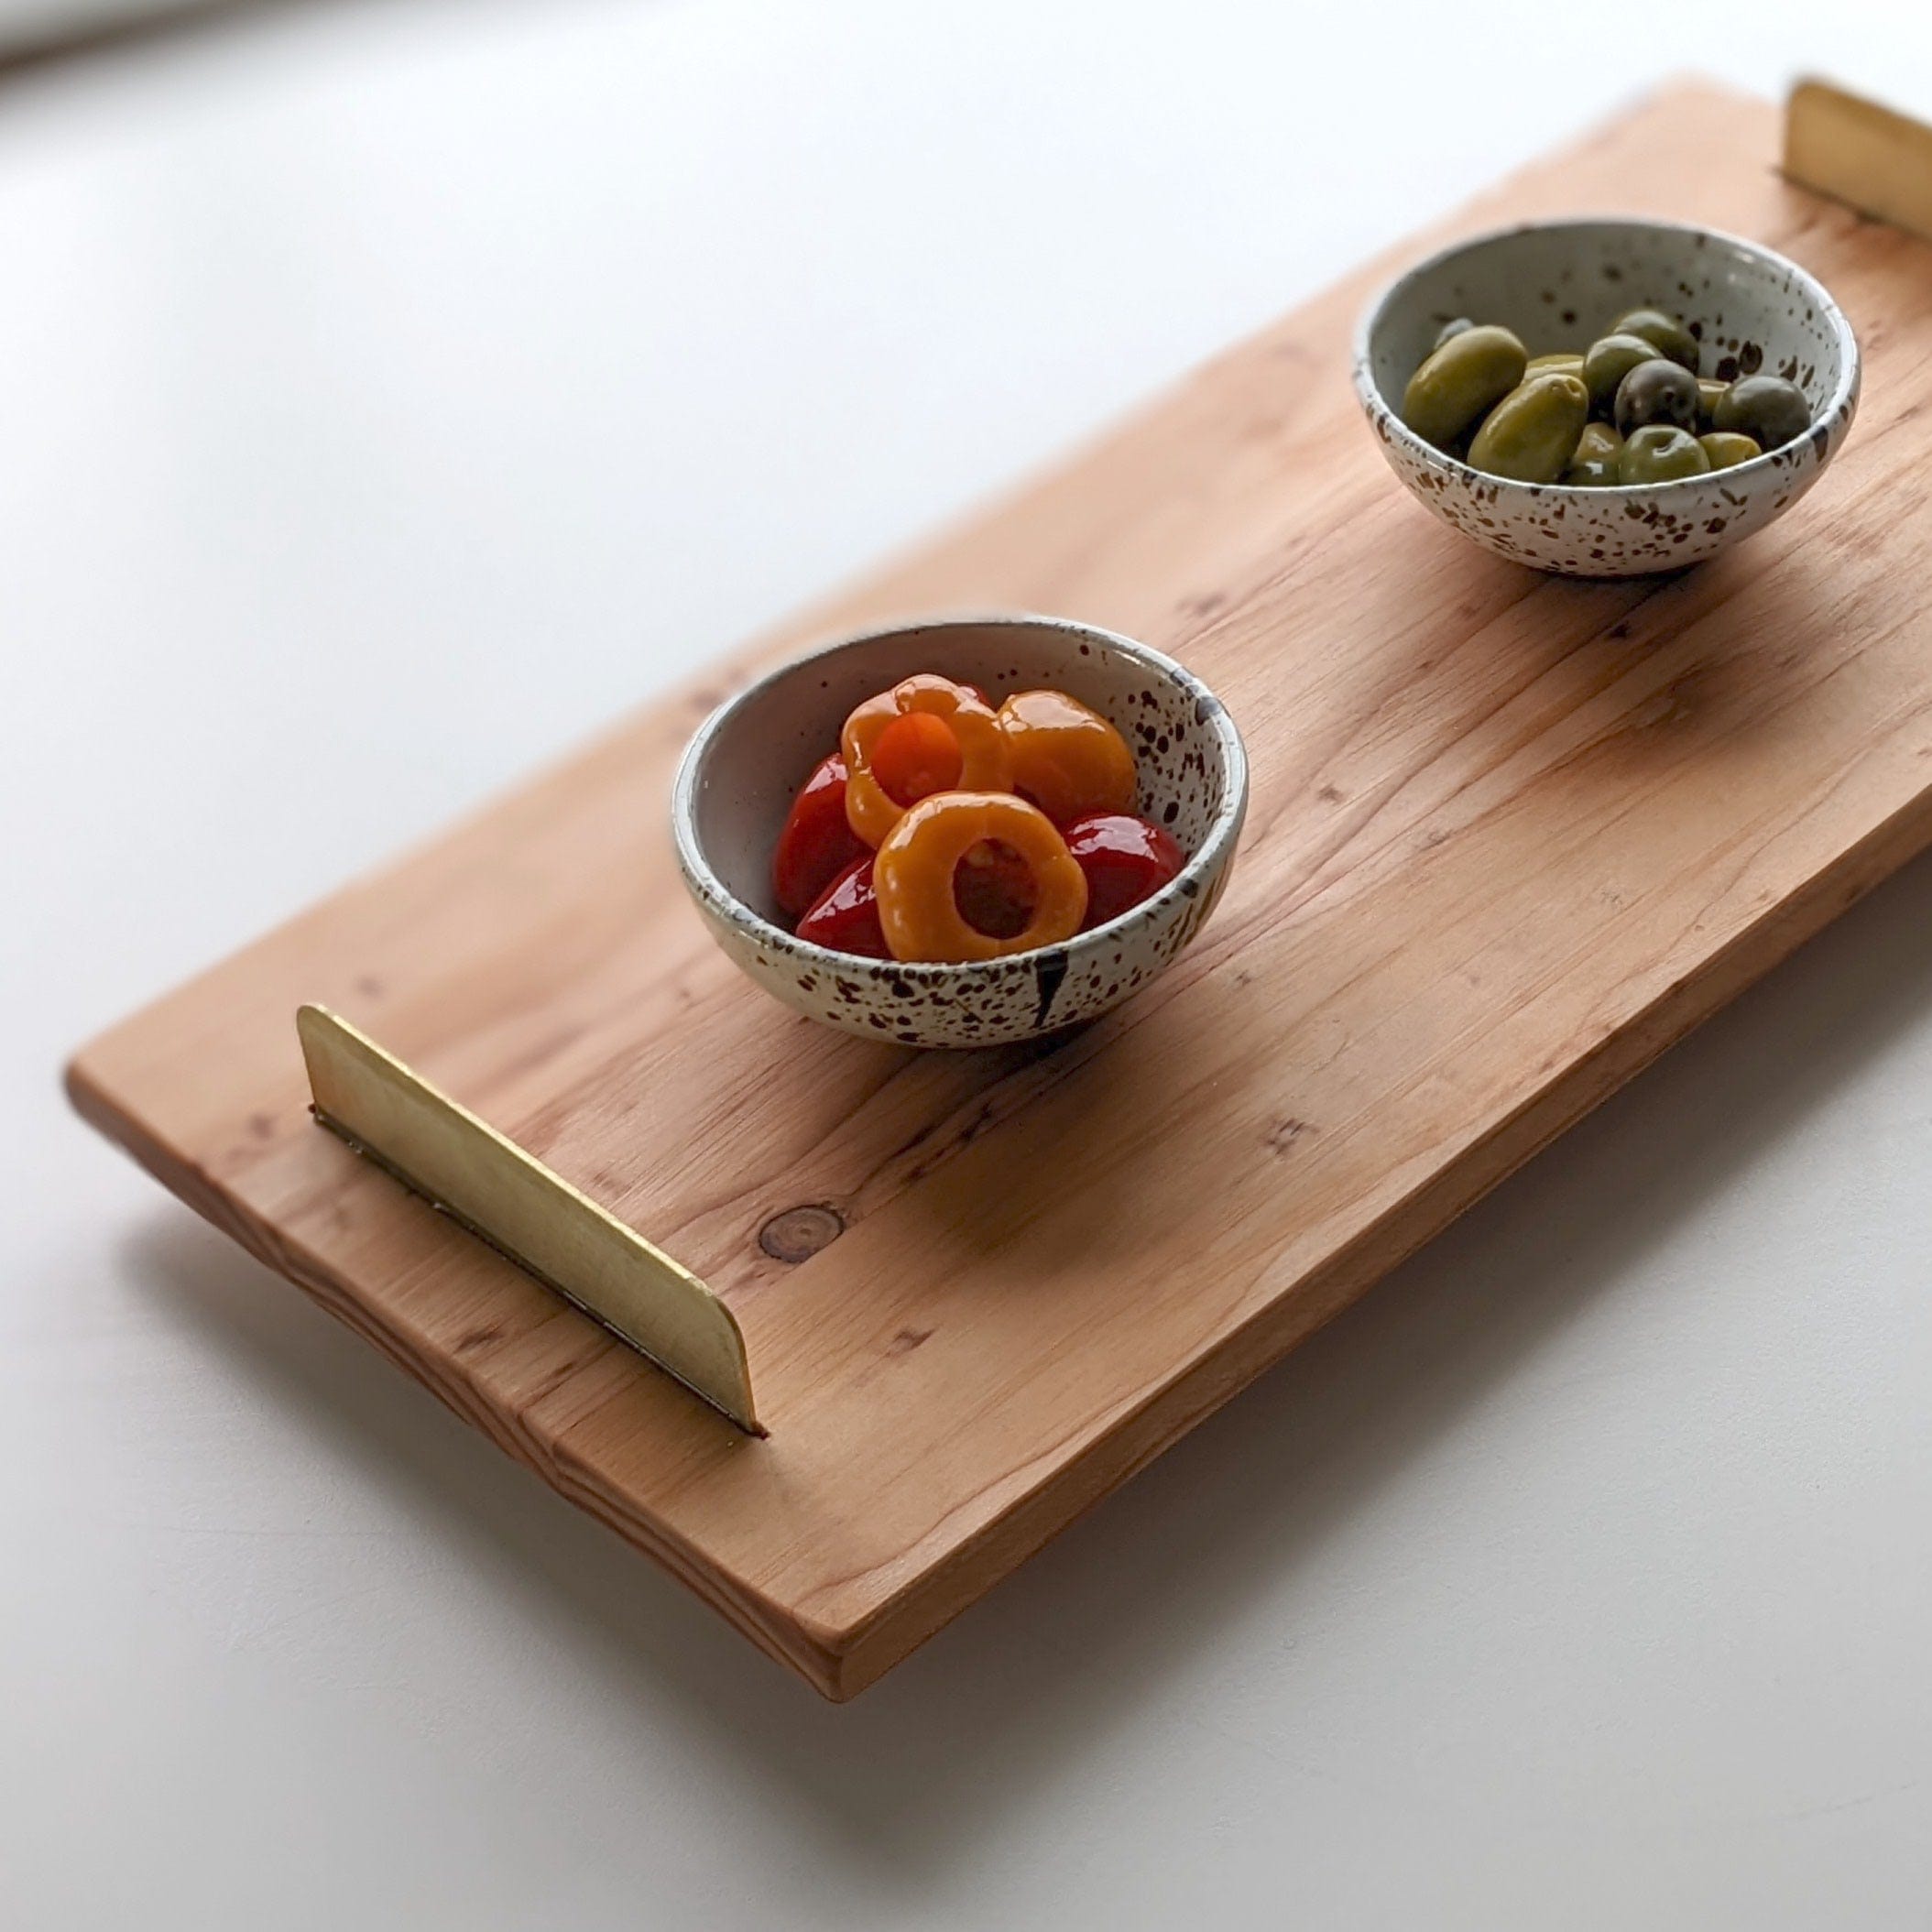 W Tray by Formr from Virginia Boys Kitchens - Virginia Boys Kitchens